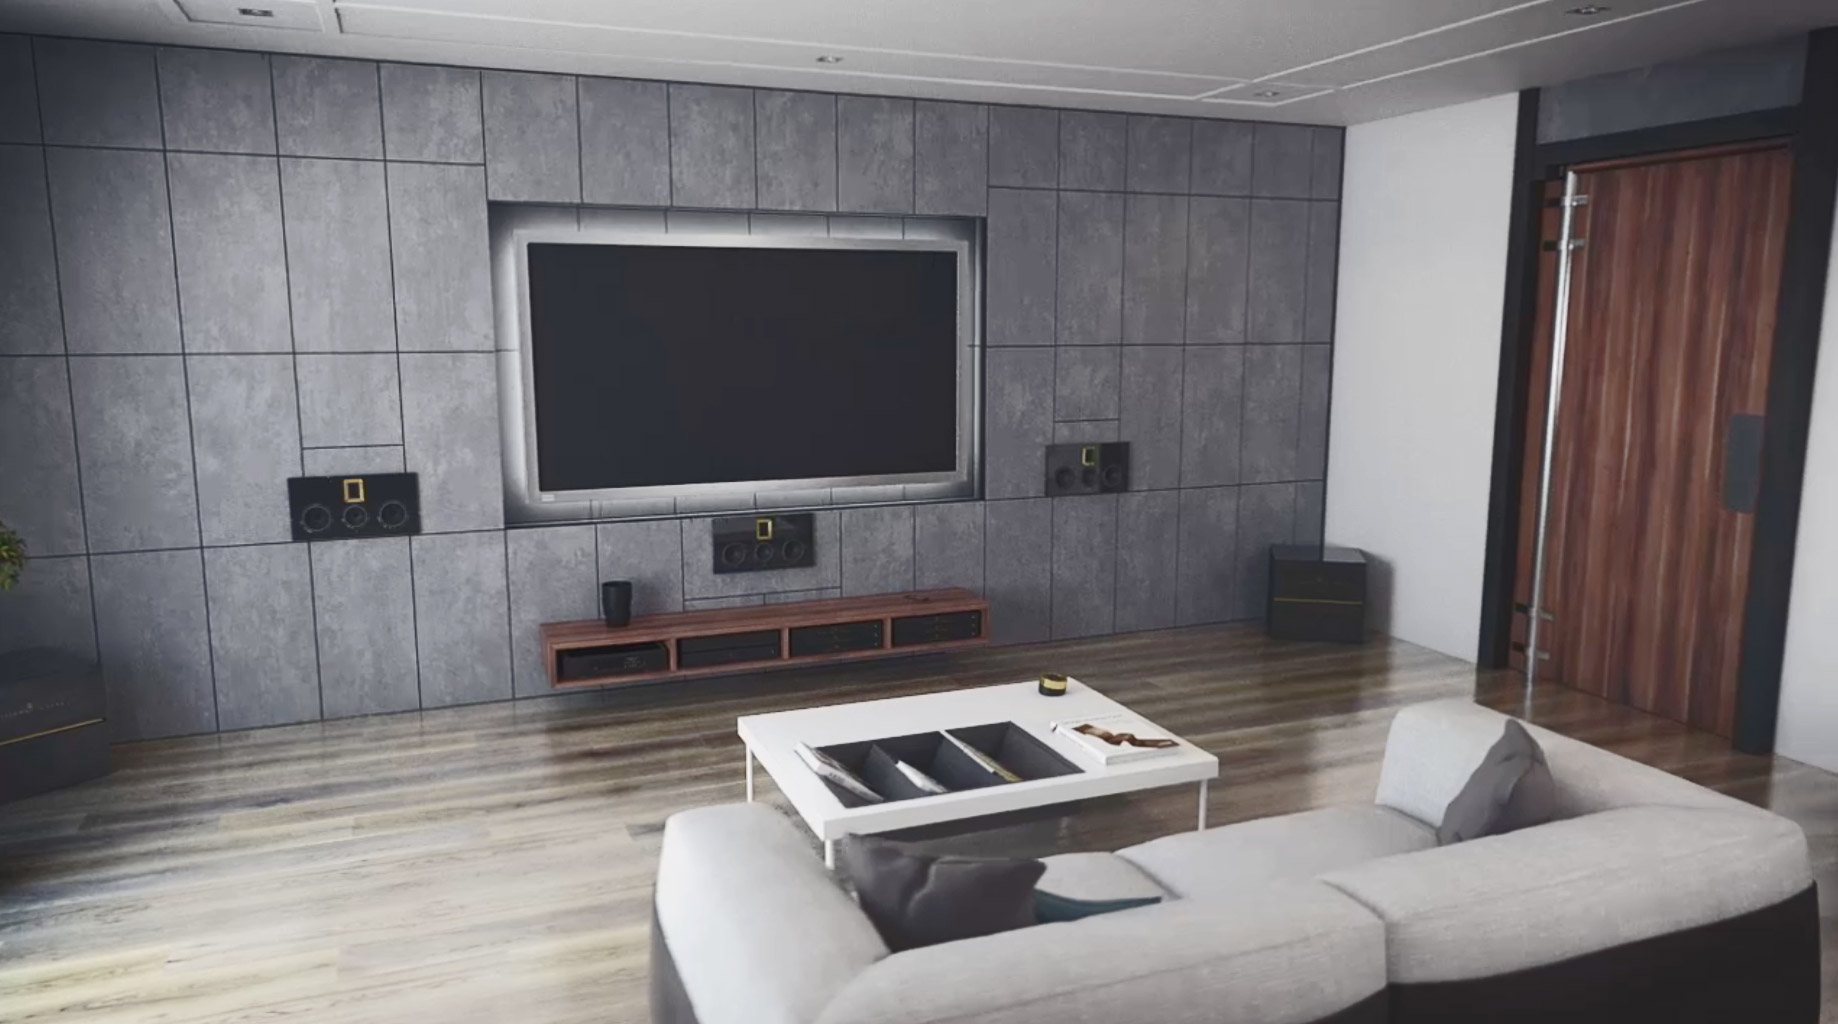 How To Get The Most Out of Your Custom Home Theater